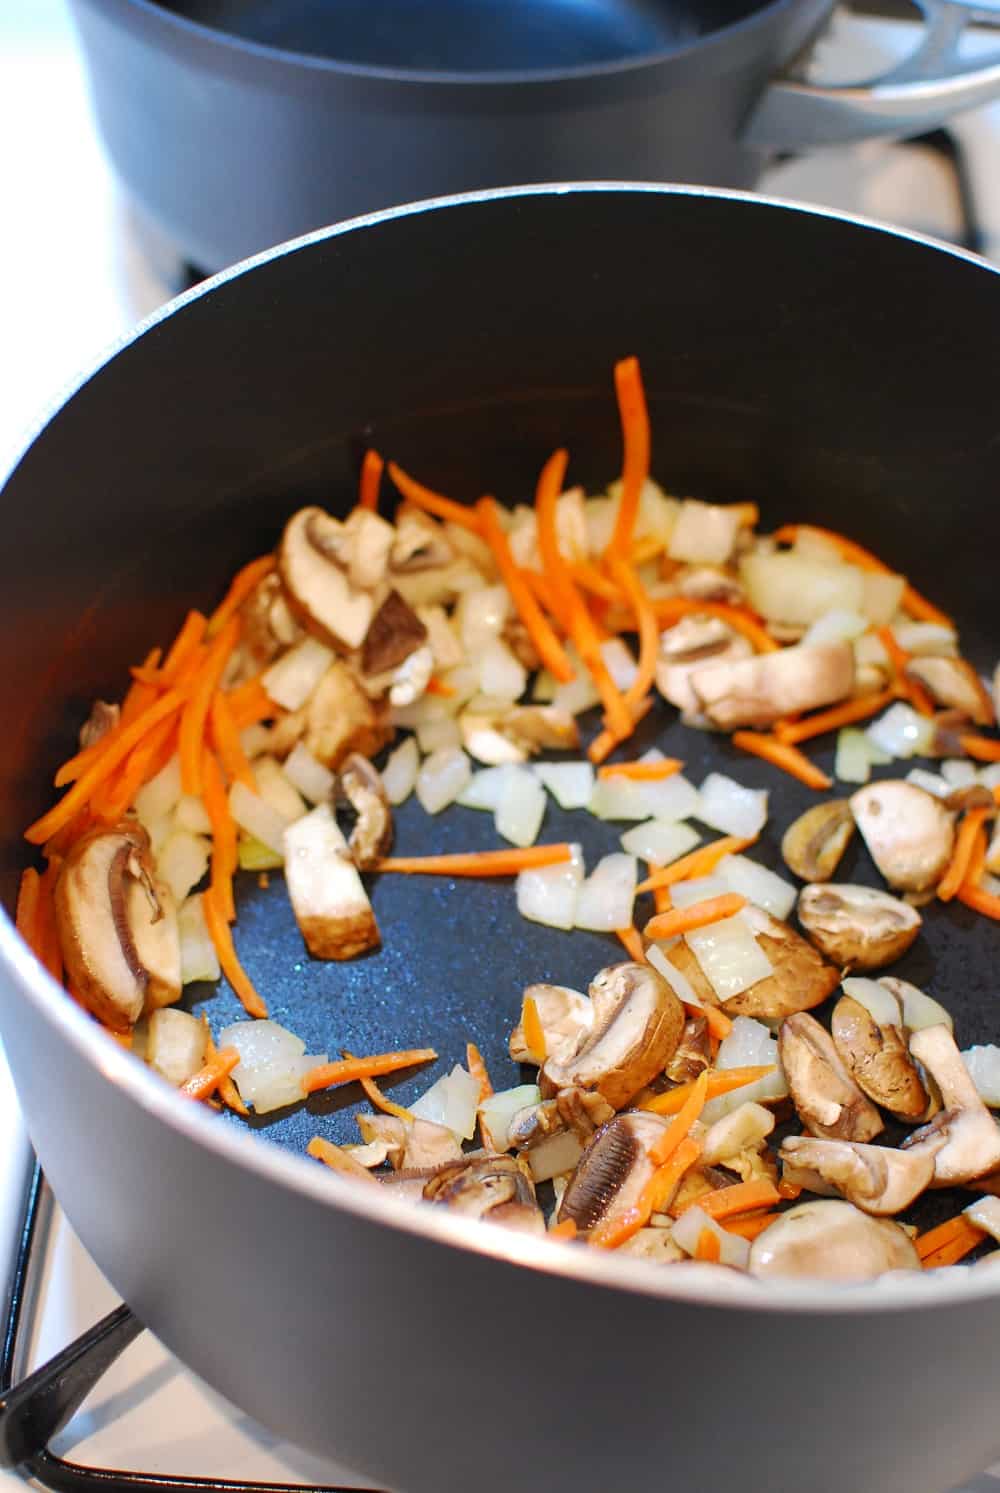 Carrots, onions, and mushrooms in a pot